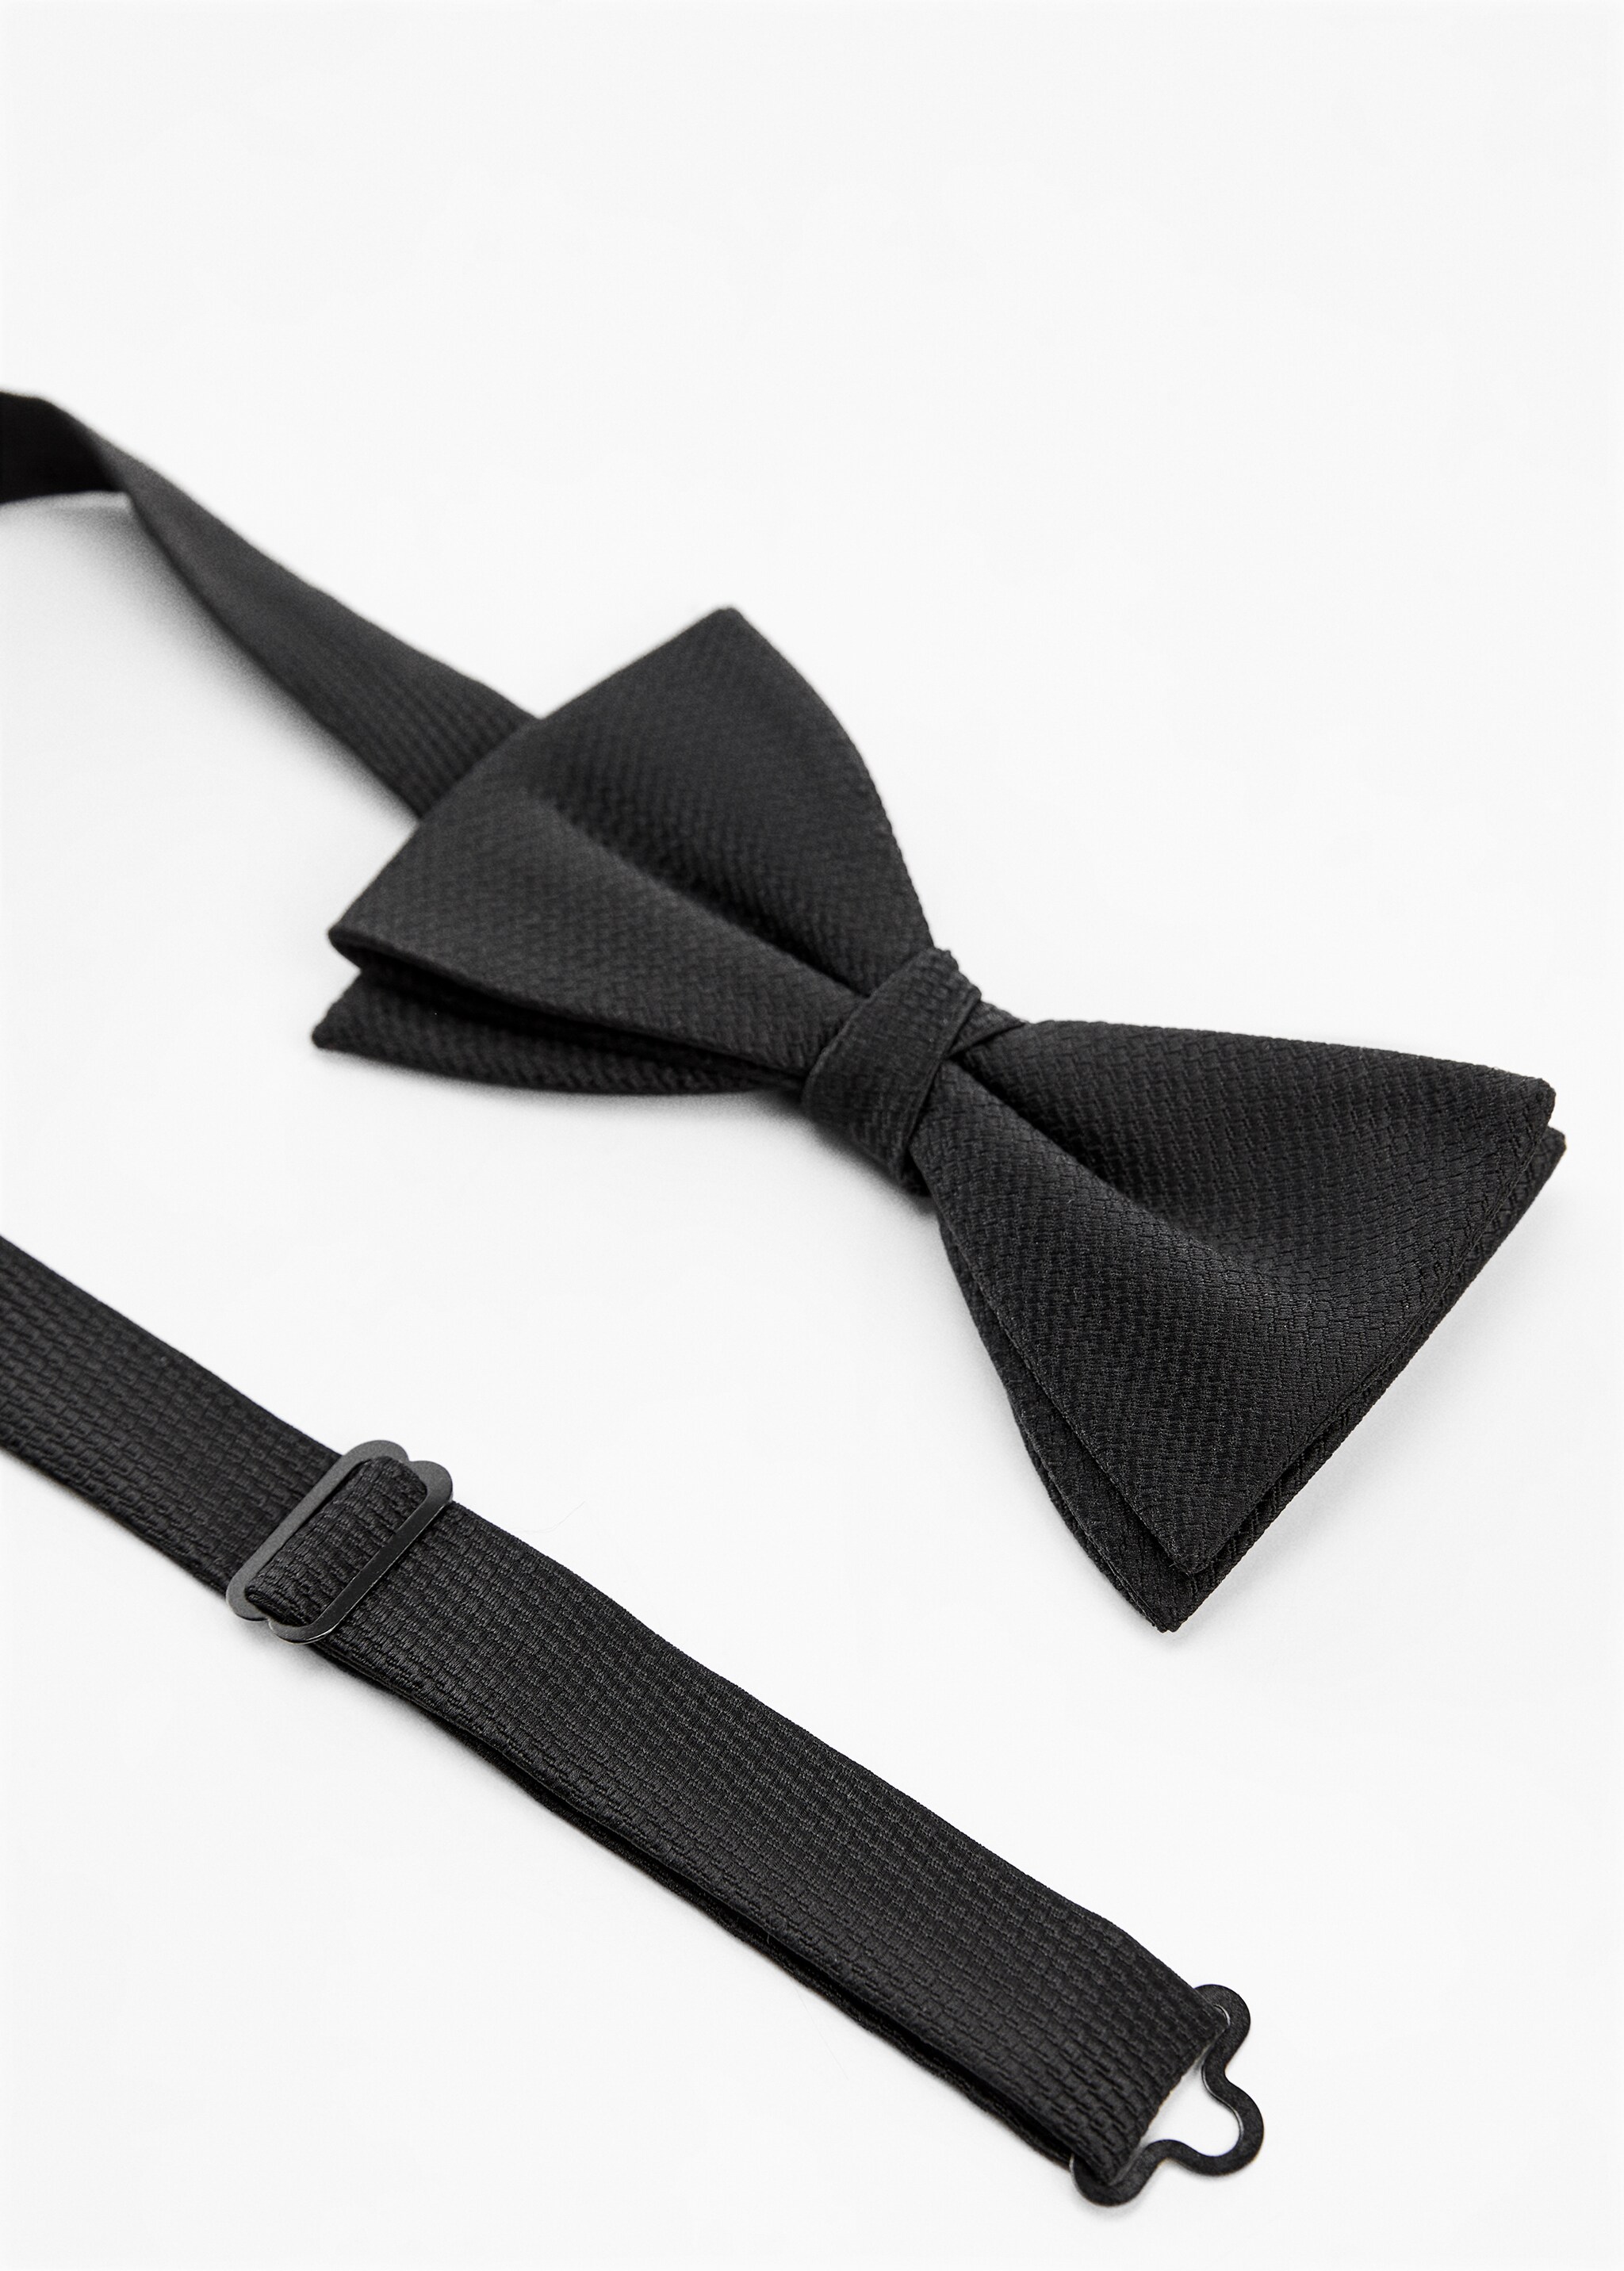 Classic bow tie with microstructure - Medium plane